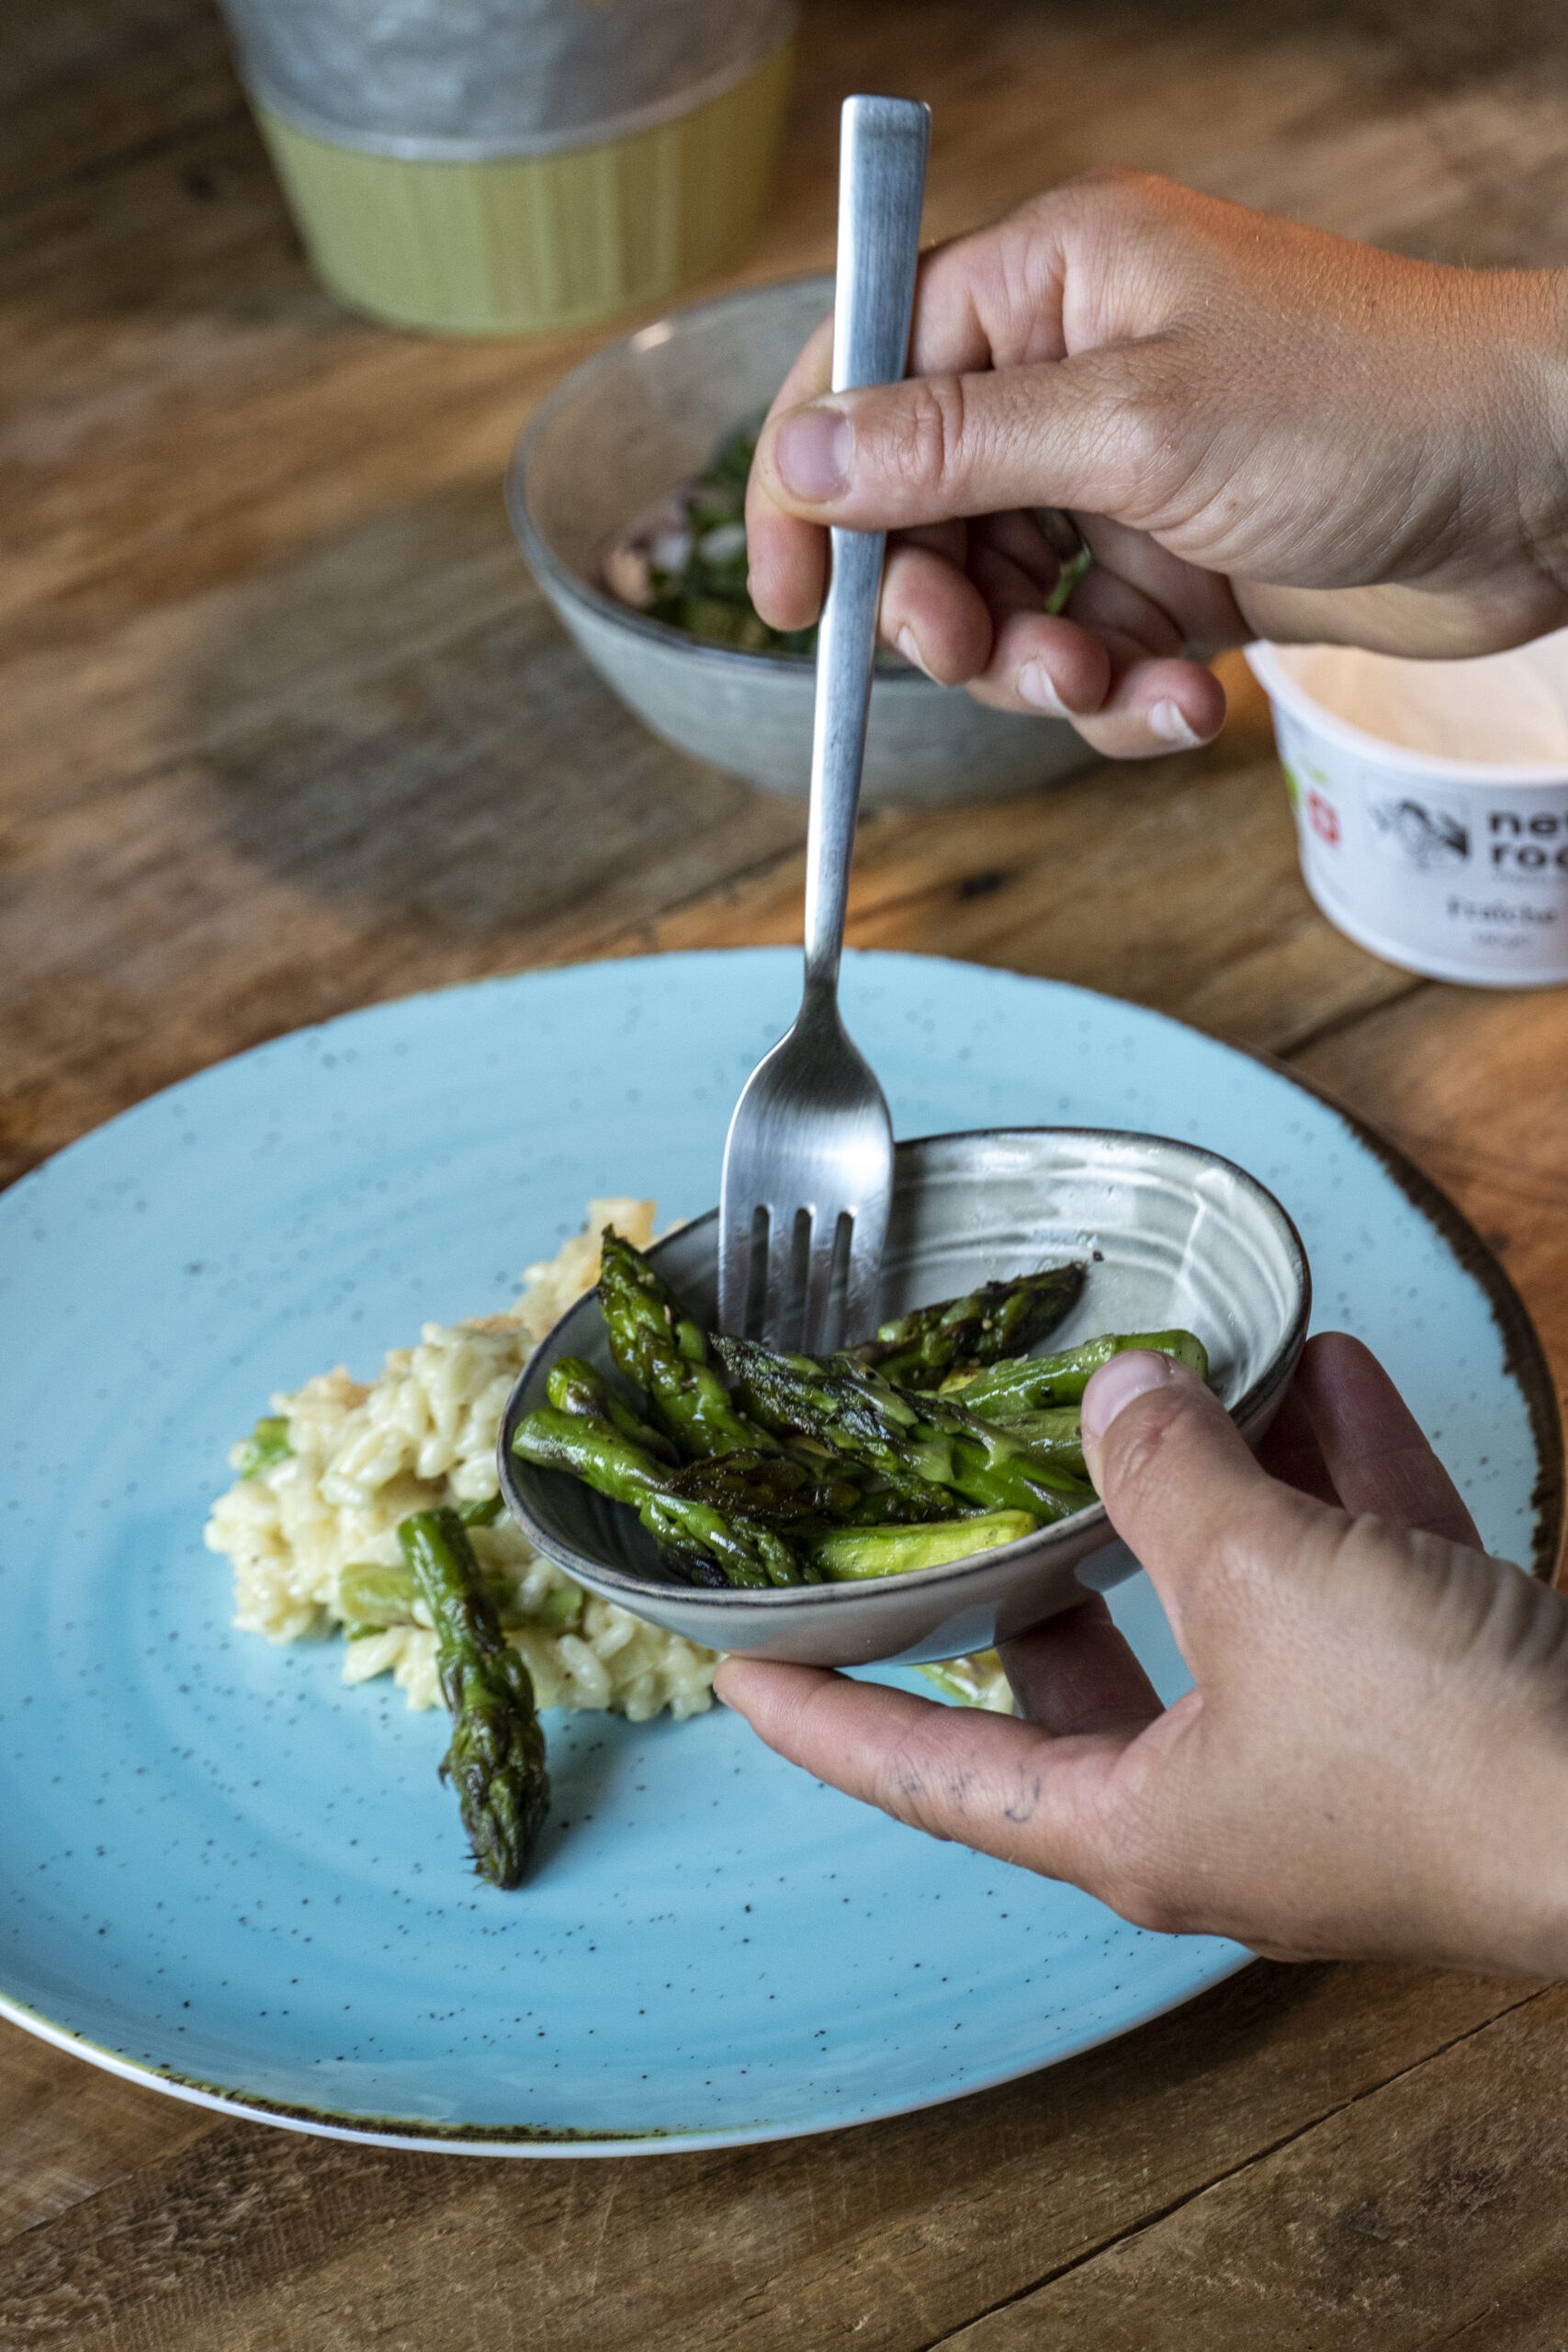 My cooking is inspired by the seasons, and this green asparagus risotto is one of my favorite spring dishes!